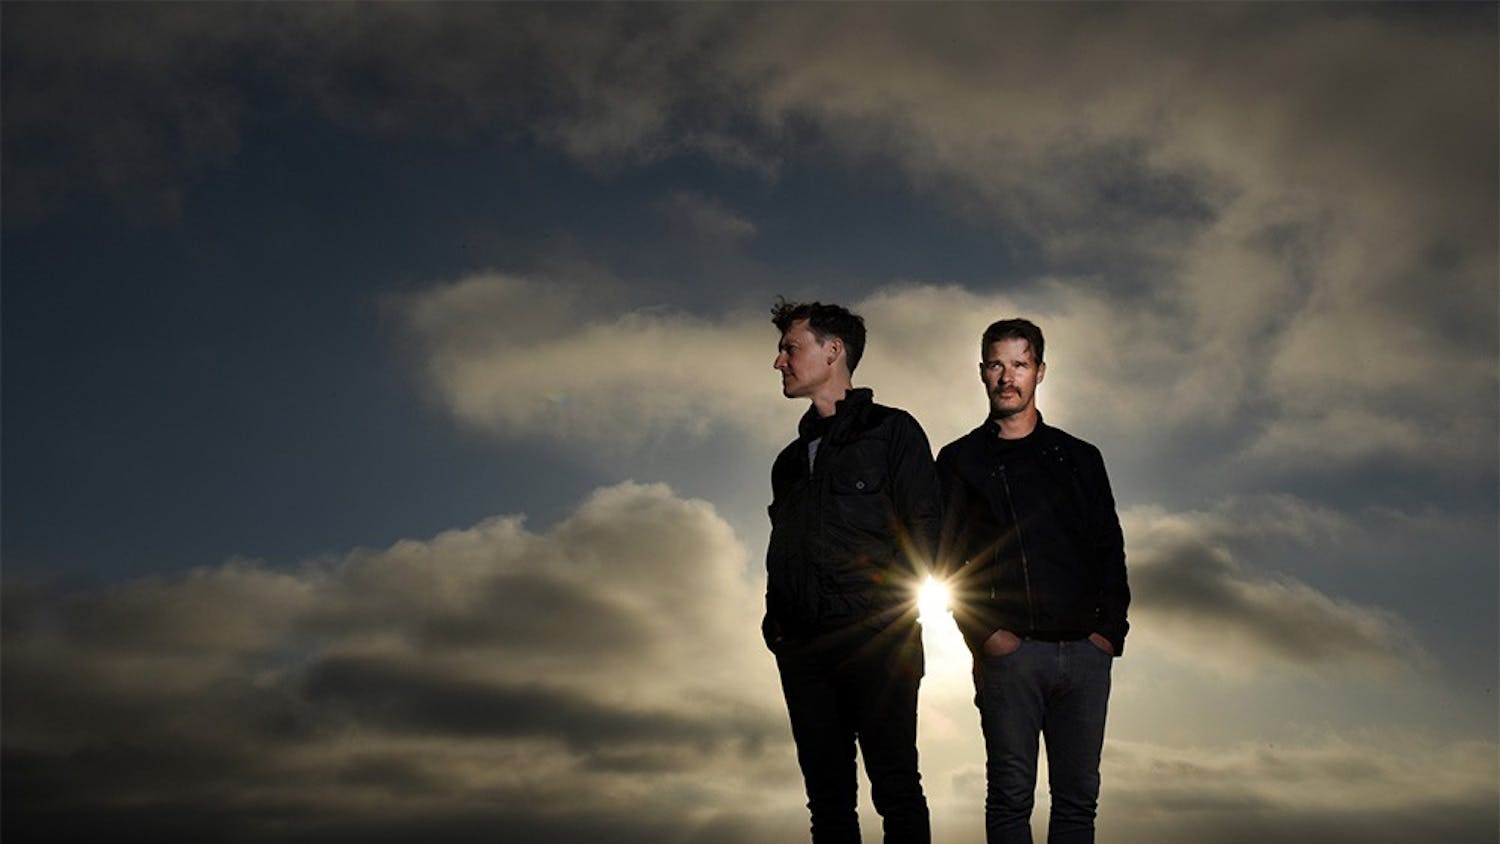 California based post rock band El Ten Eleven will play at The Bishop on Tuesday. 